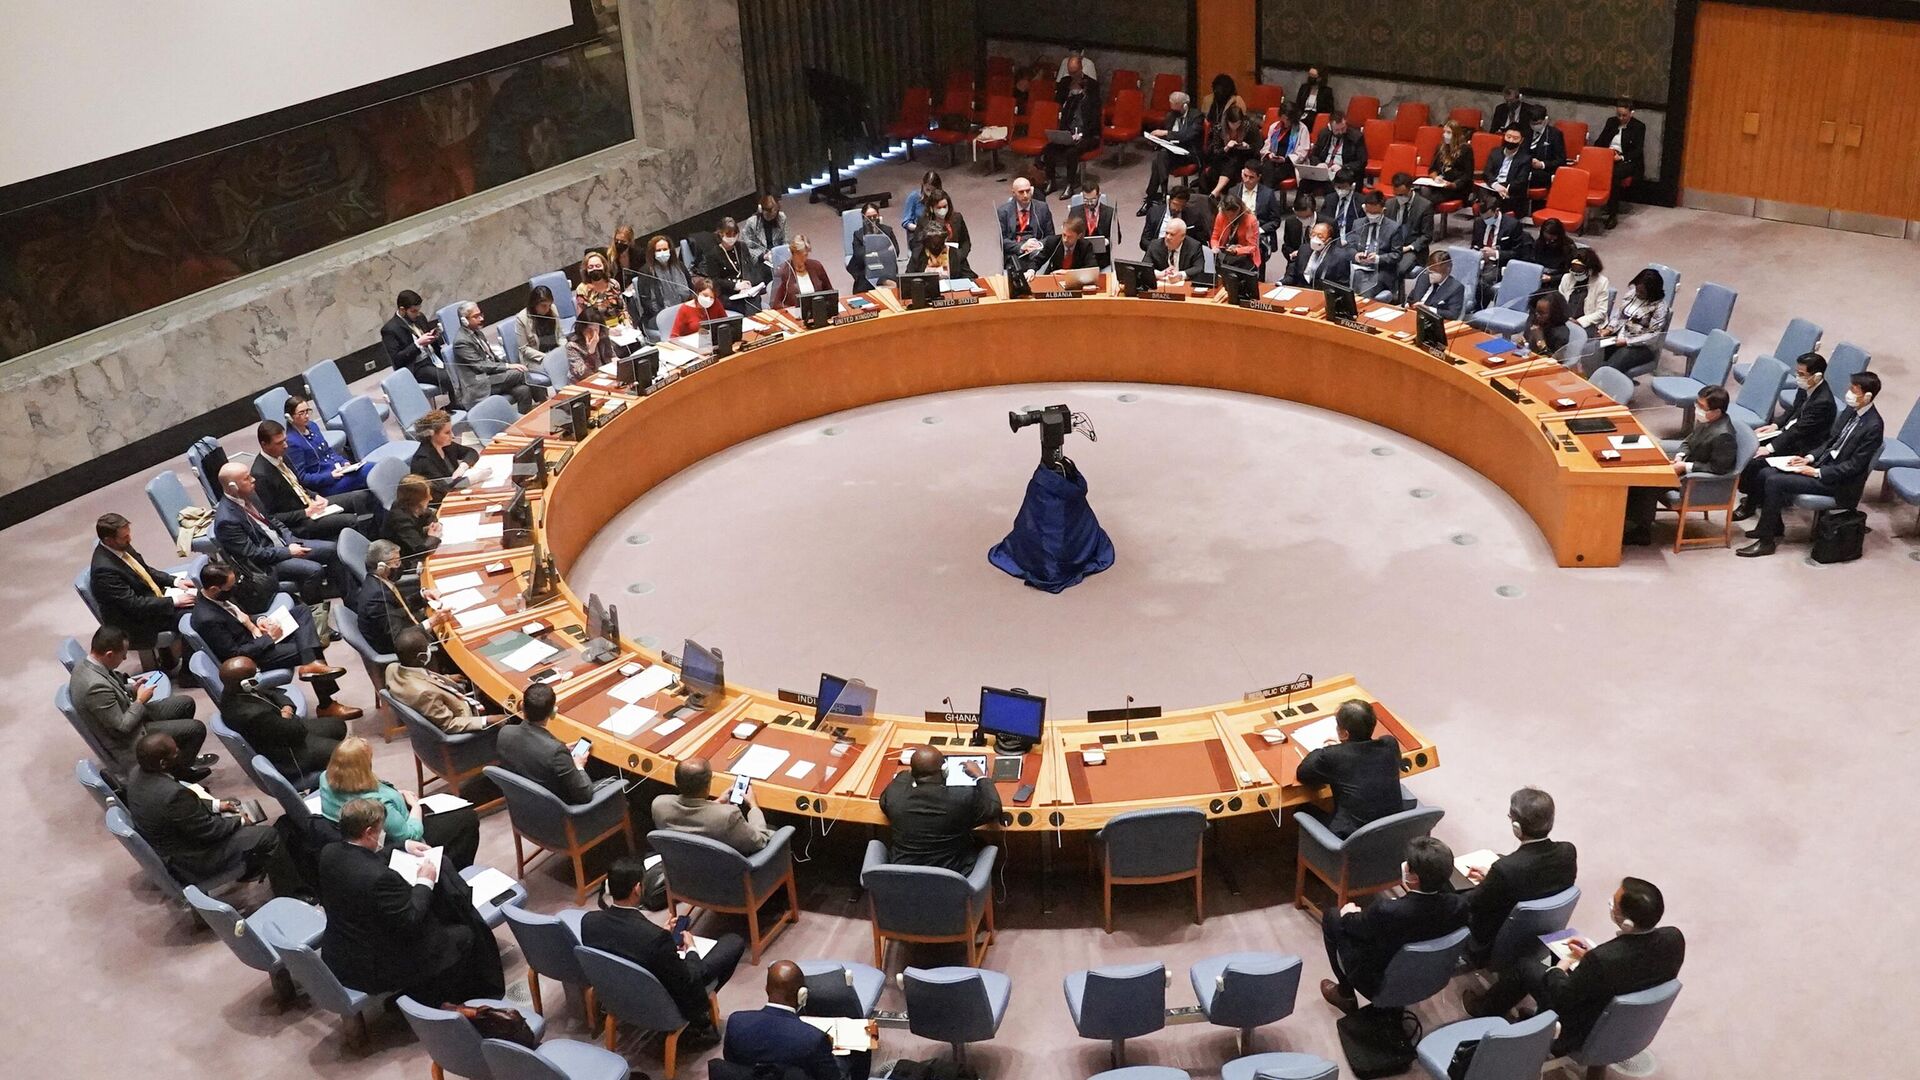 The United Nations Security Council meets concerning North Korea's test-firing of an intercontinental ballistic missile, Friday March 25, 2022 at U.N. headquarters. - Sputnik International, 1920, 11.05.2022